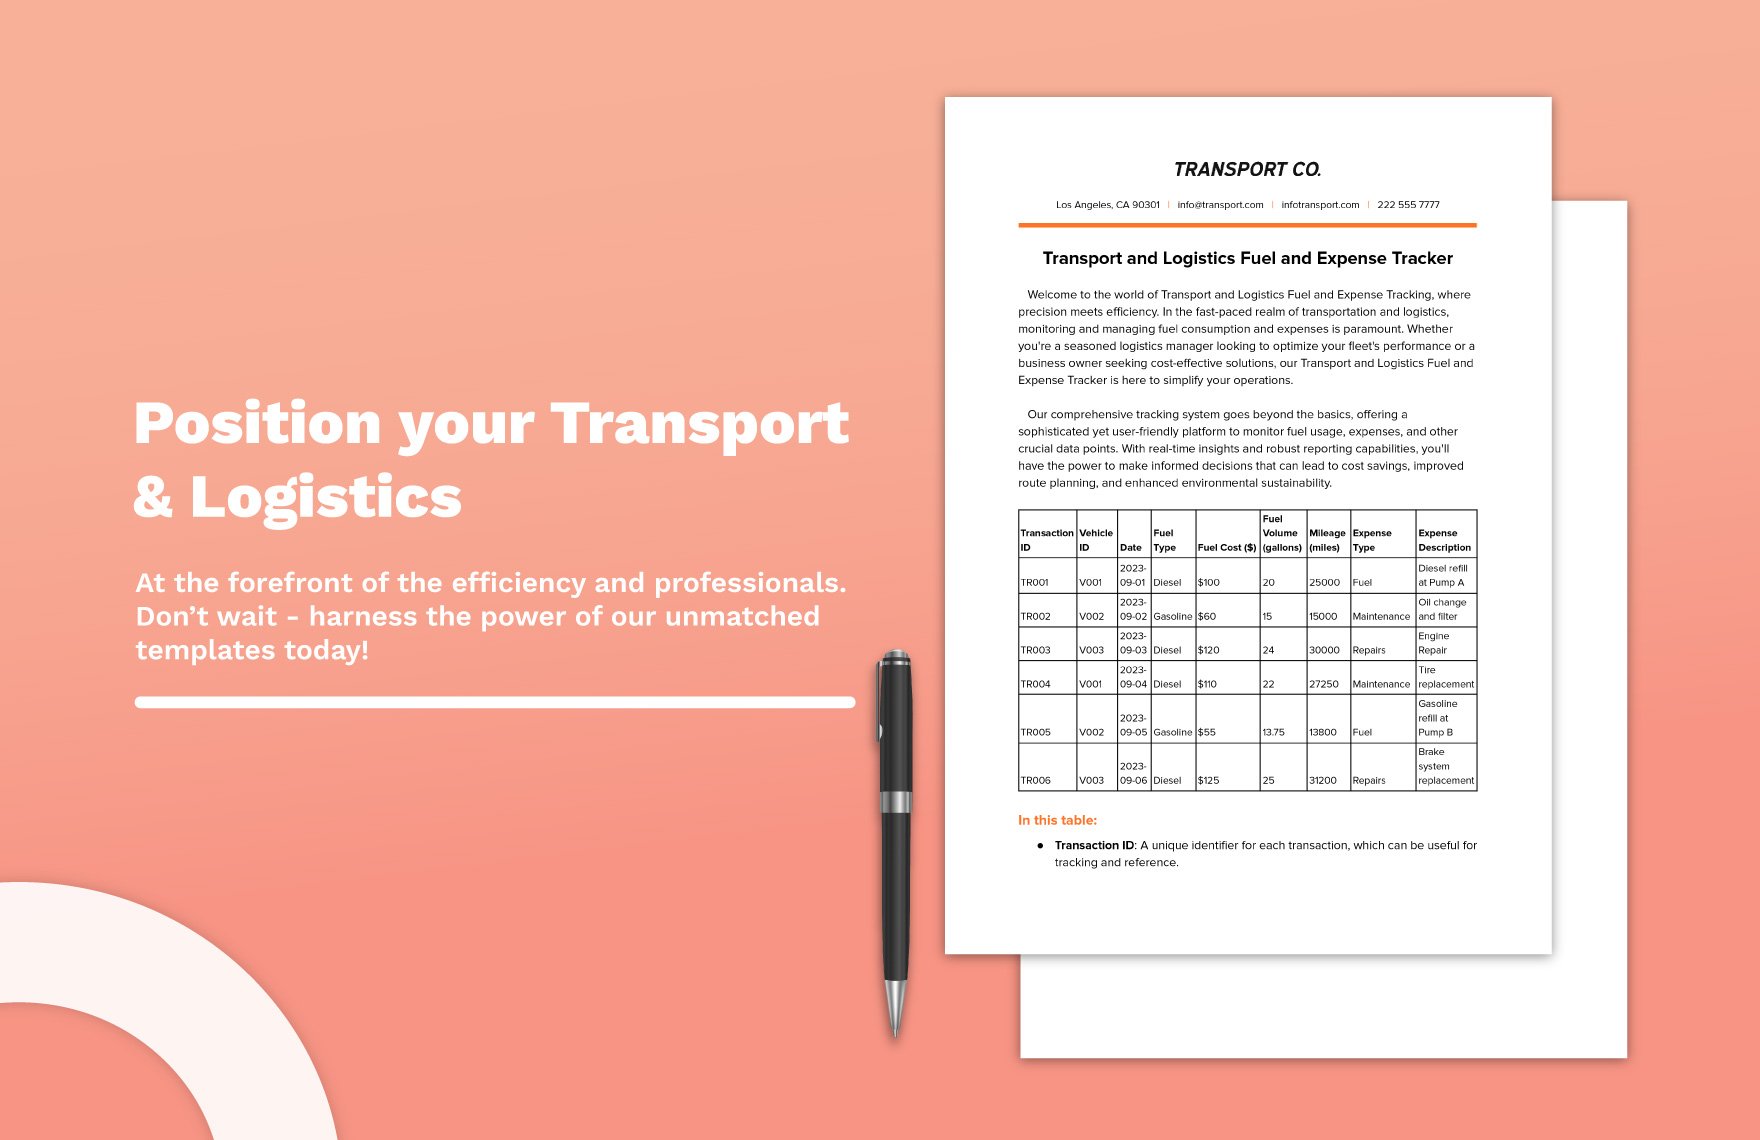 Transport and Logistics Fuel and Expense Tracker Template 